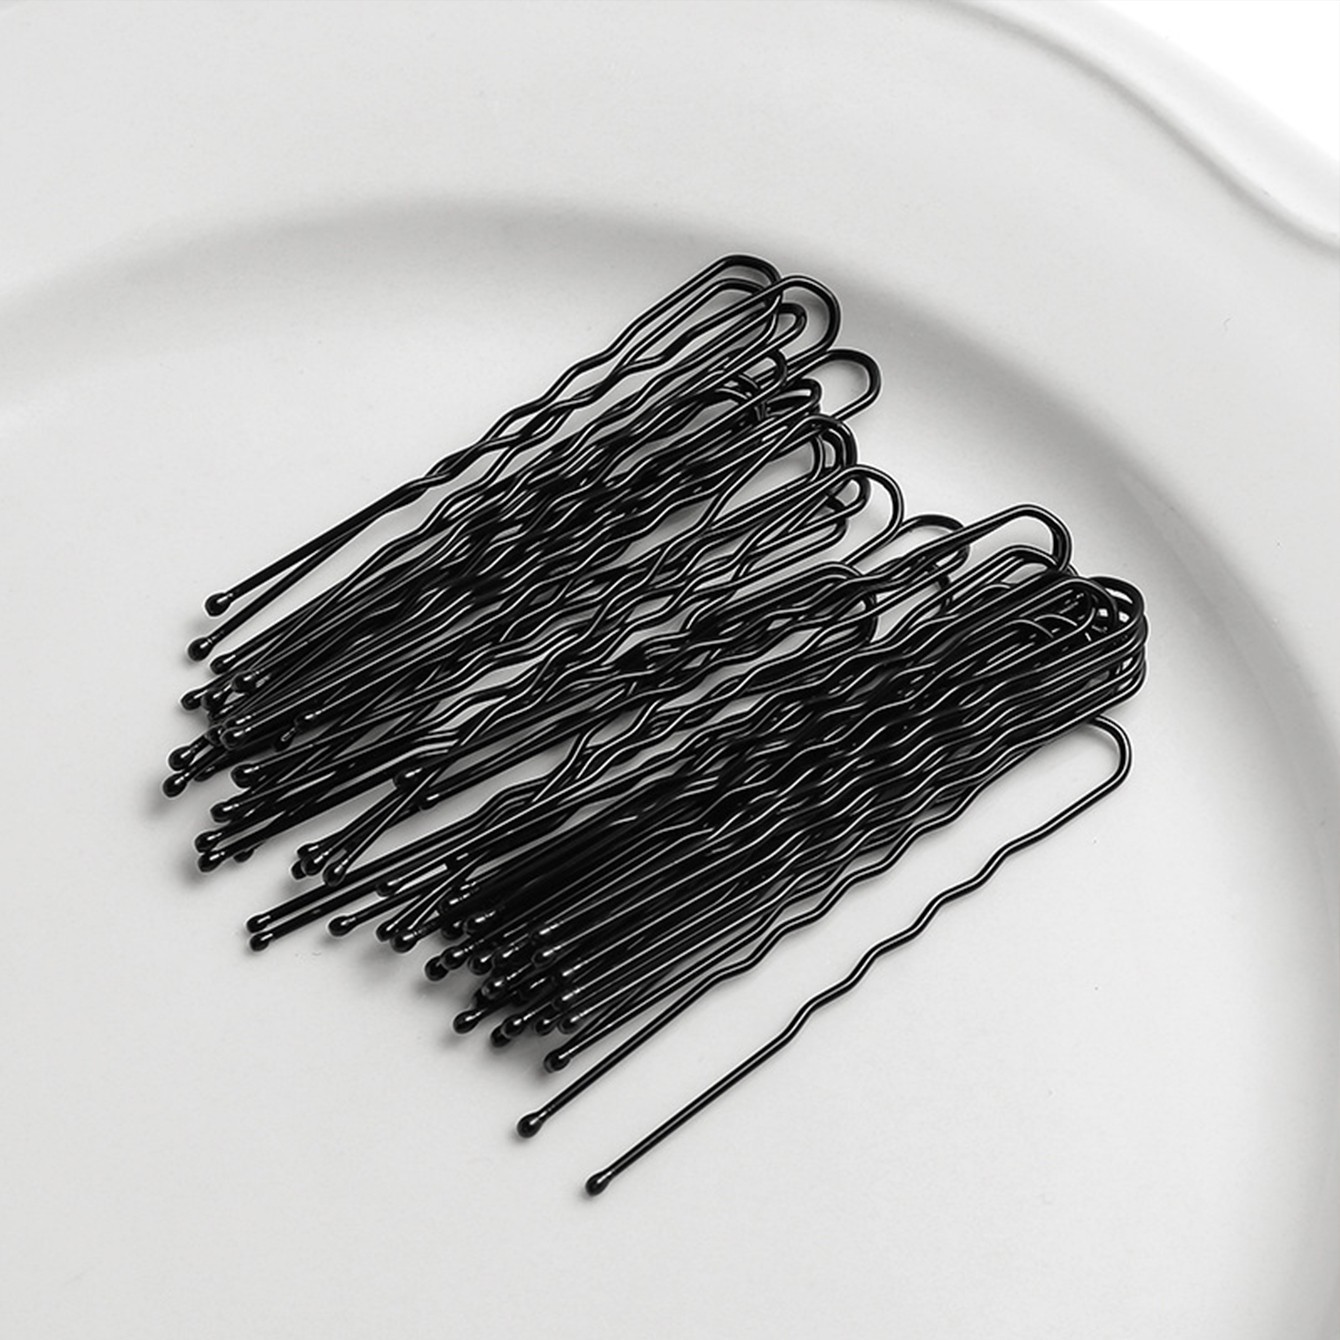 20 Black Metal U Shaped Hairpins Invisible Curly & Wavy Black Hair Pins For  Health & Beauty Styling 6cm From Asimy, $2.62